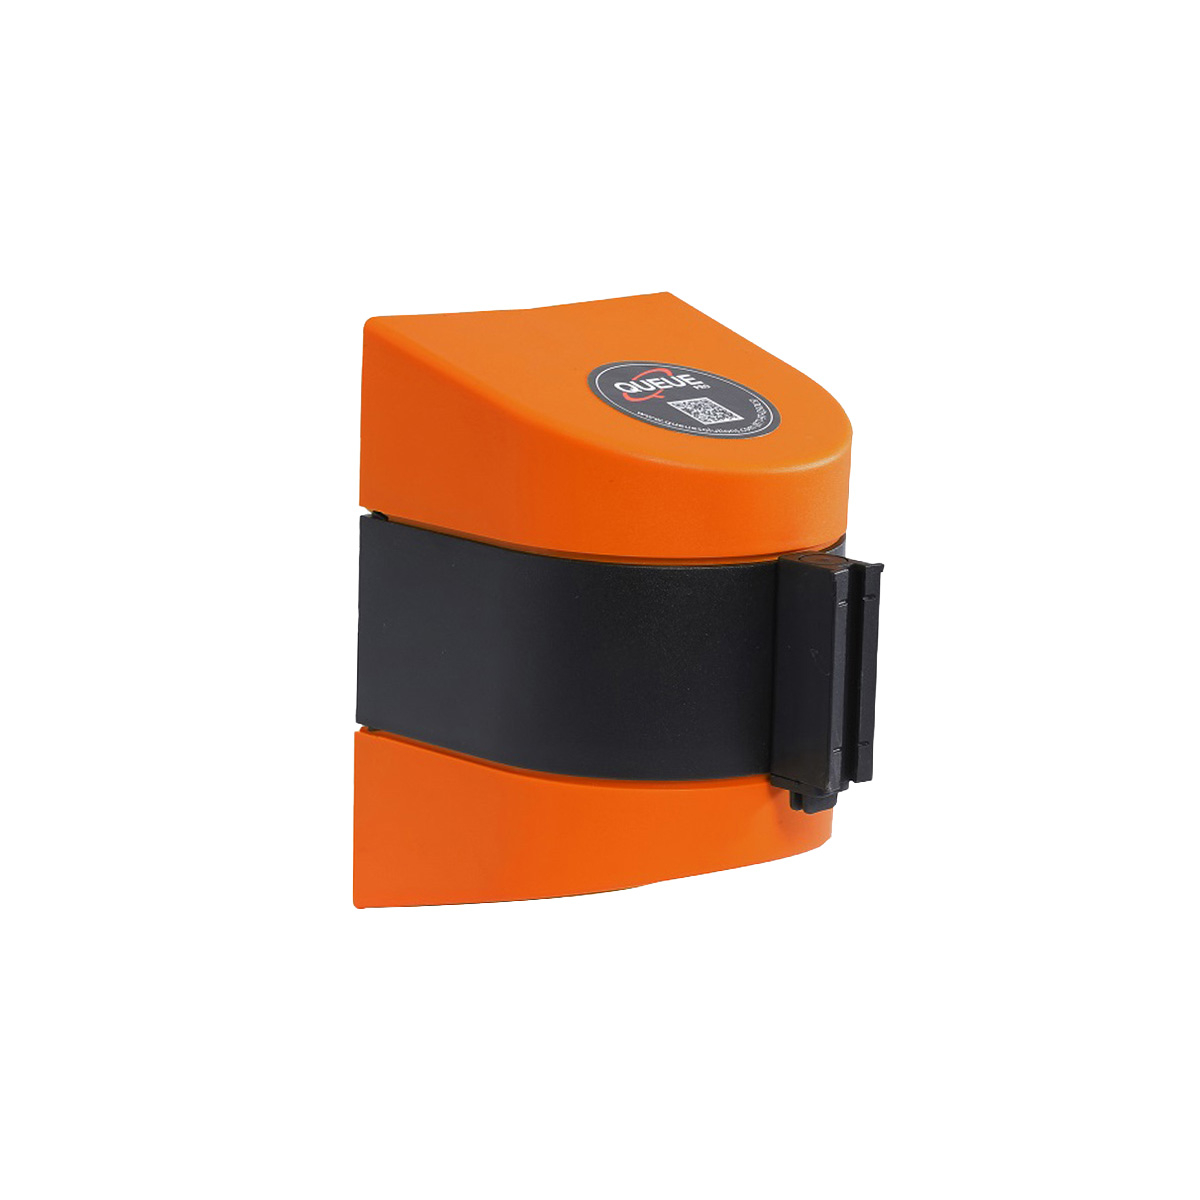 WallPro Wall Mounted Retracting Belt Barrier Has 19 Retractable Tape Colours To Choose From